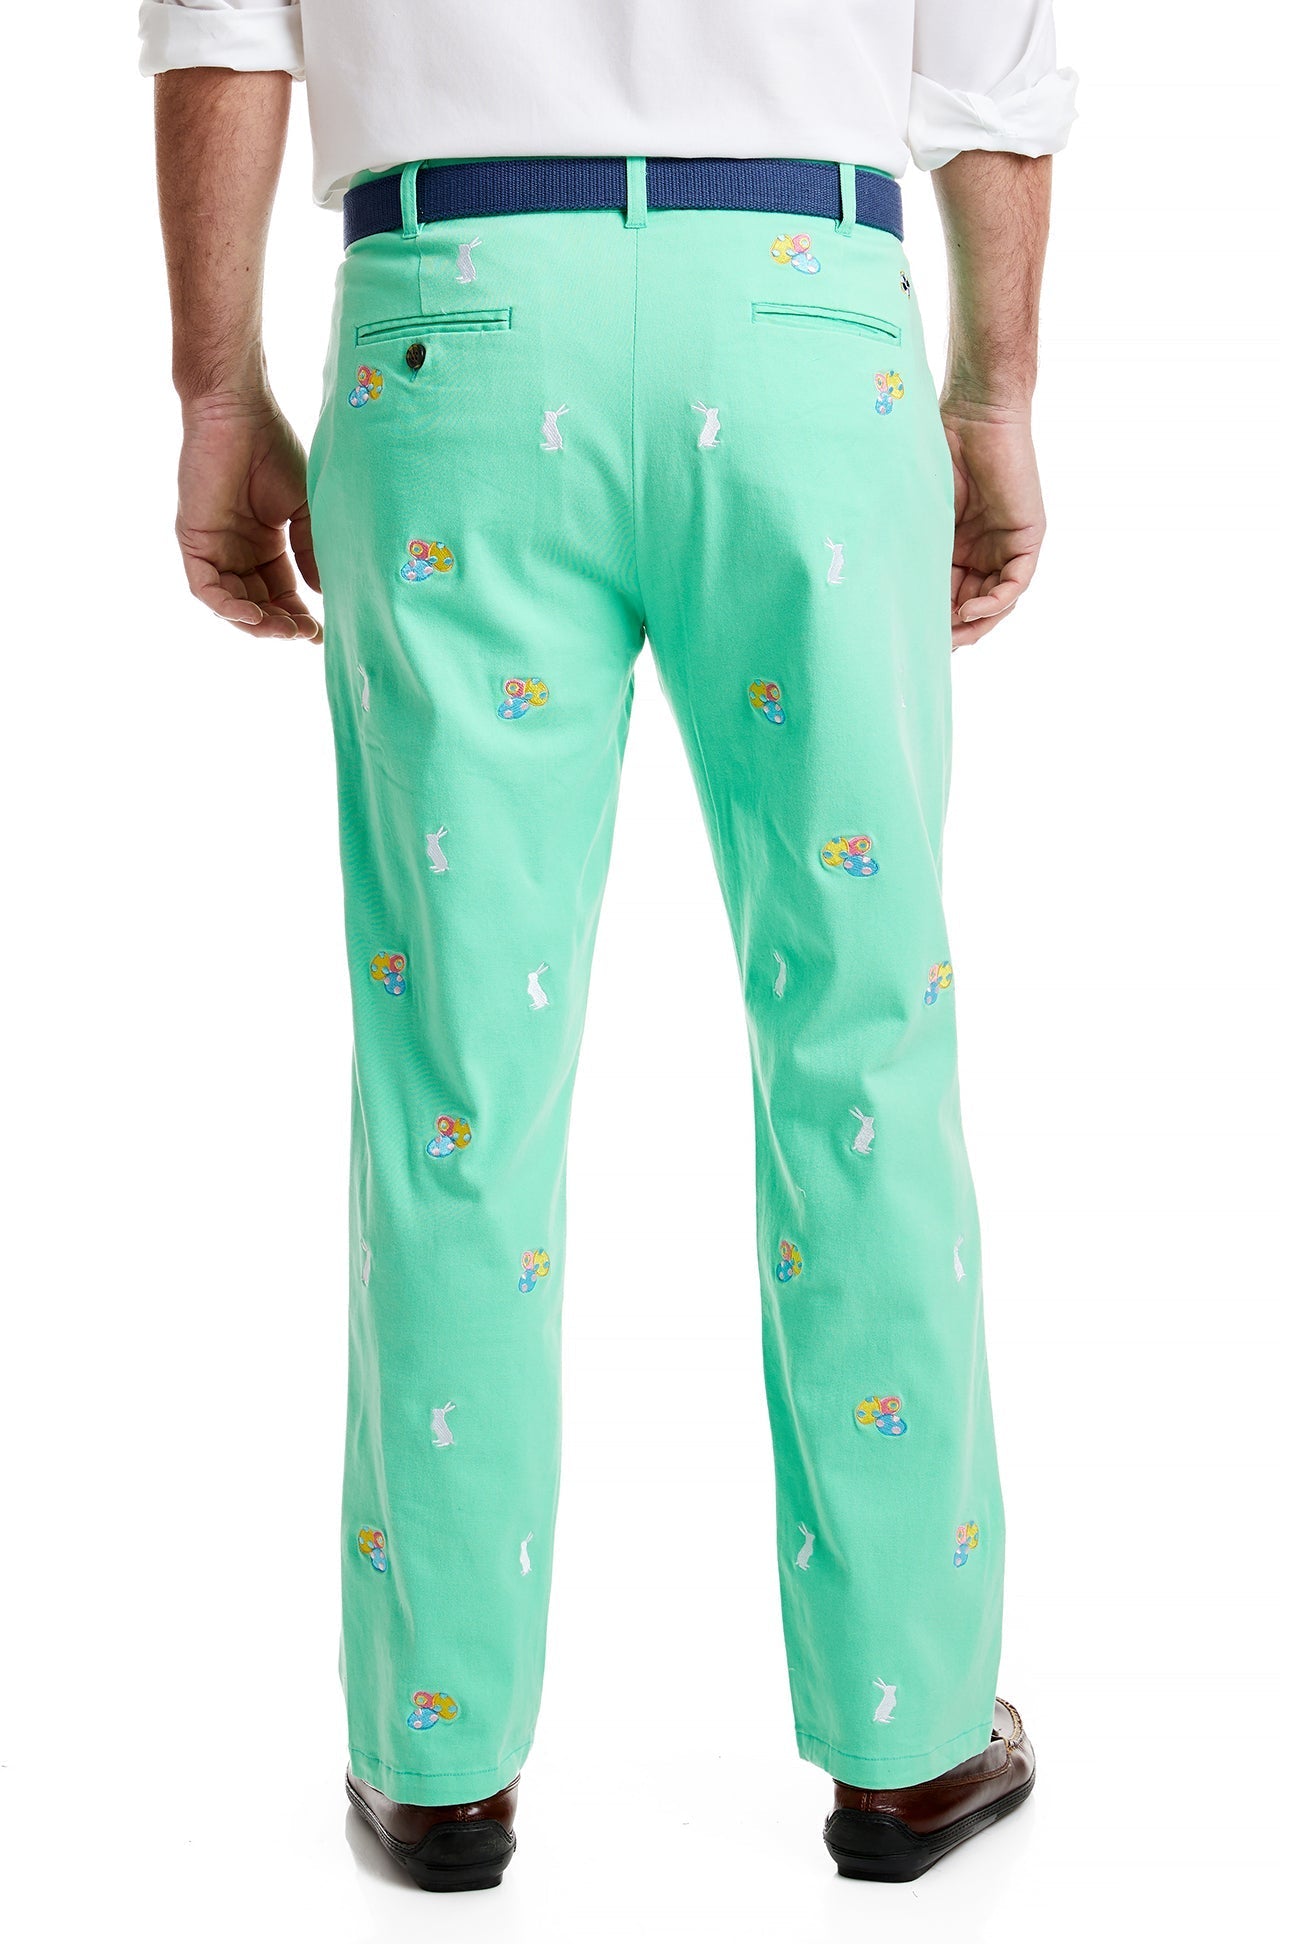 Harbor Pant Stretch Twill Spring Green with Easter Eggs & Bunny MENS EMBROIDERED PANTS Castaway Nantucket Island